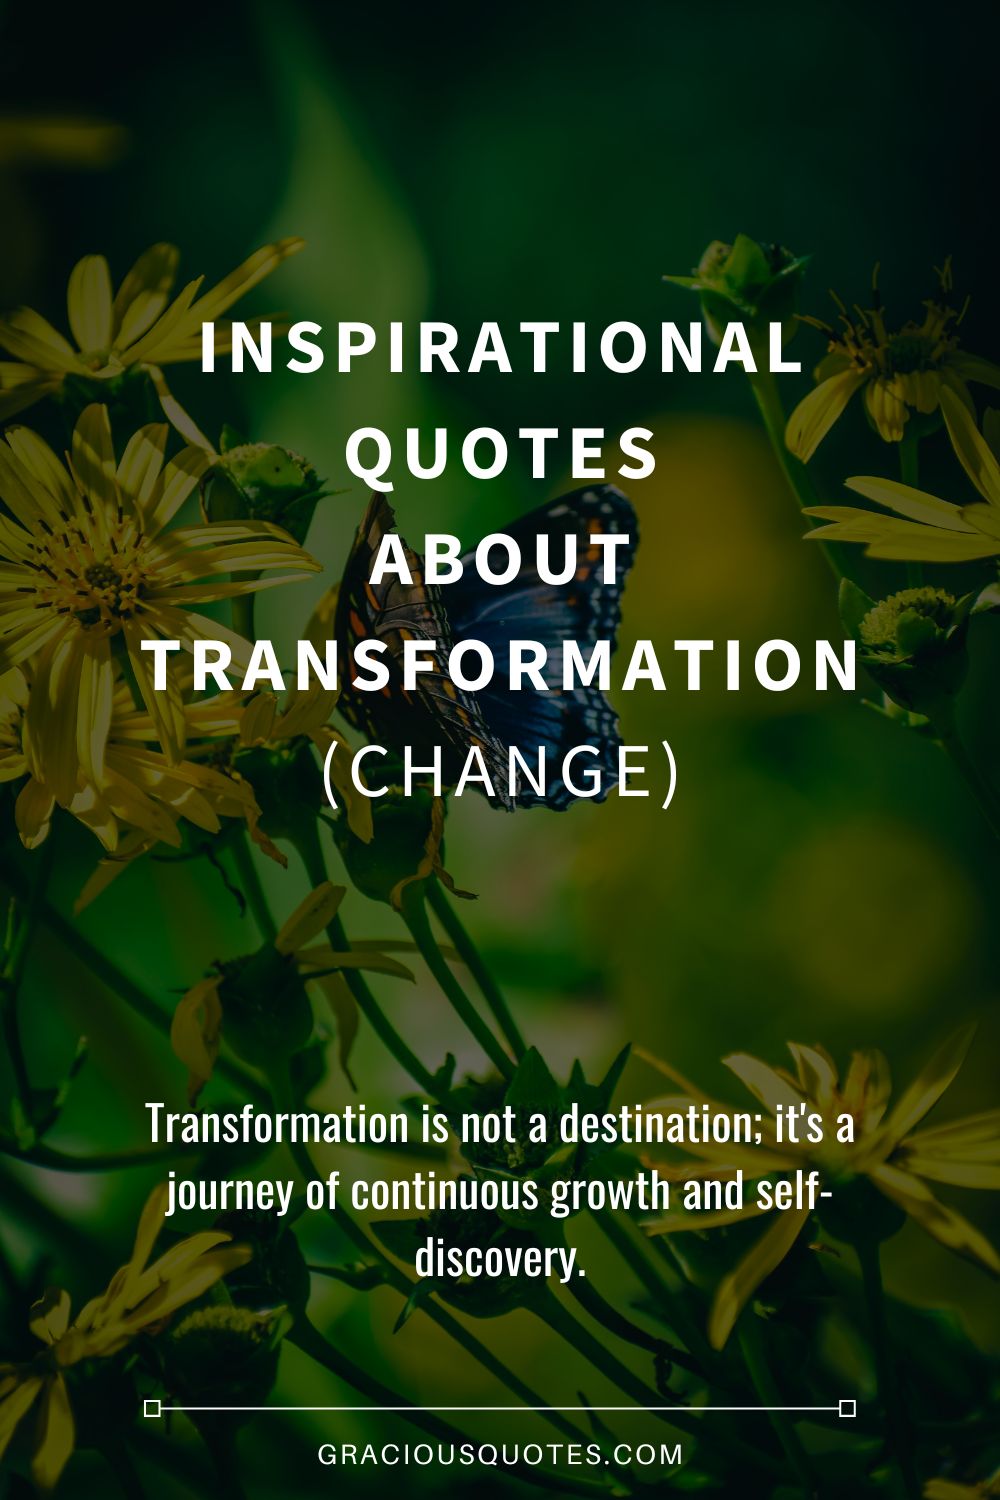 Inspirational Quotes About Transformation (CHANGE) - Gracious Quotes